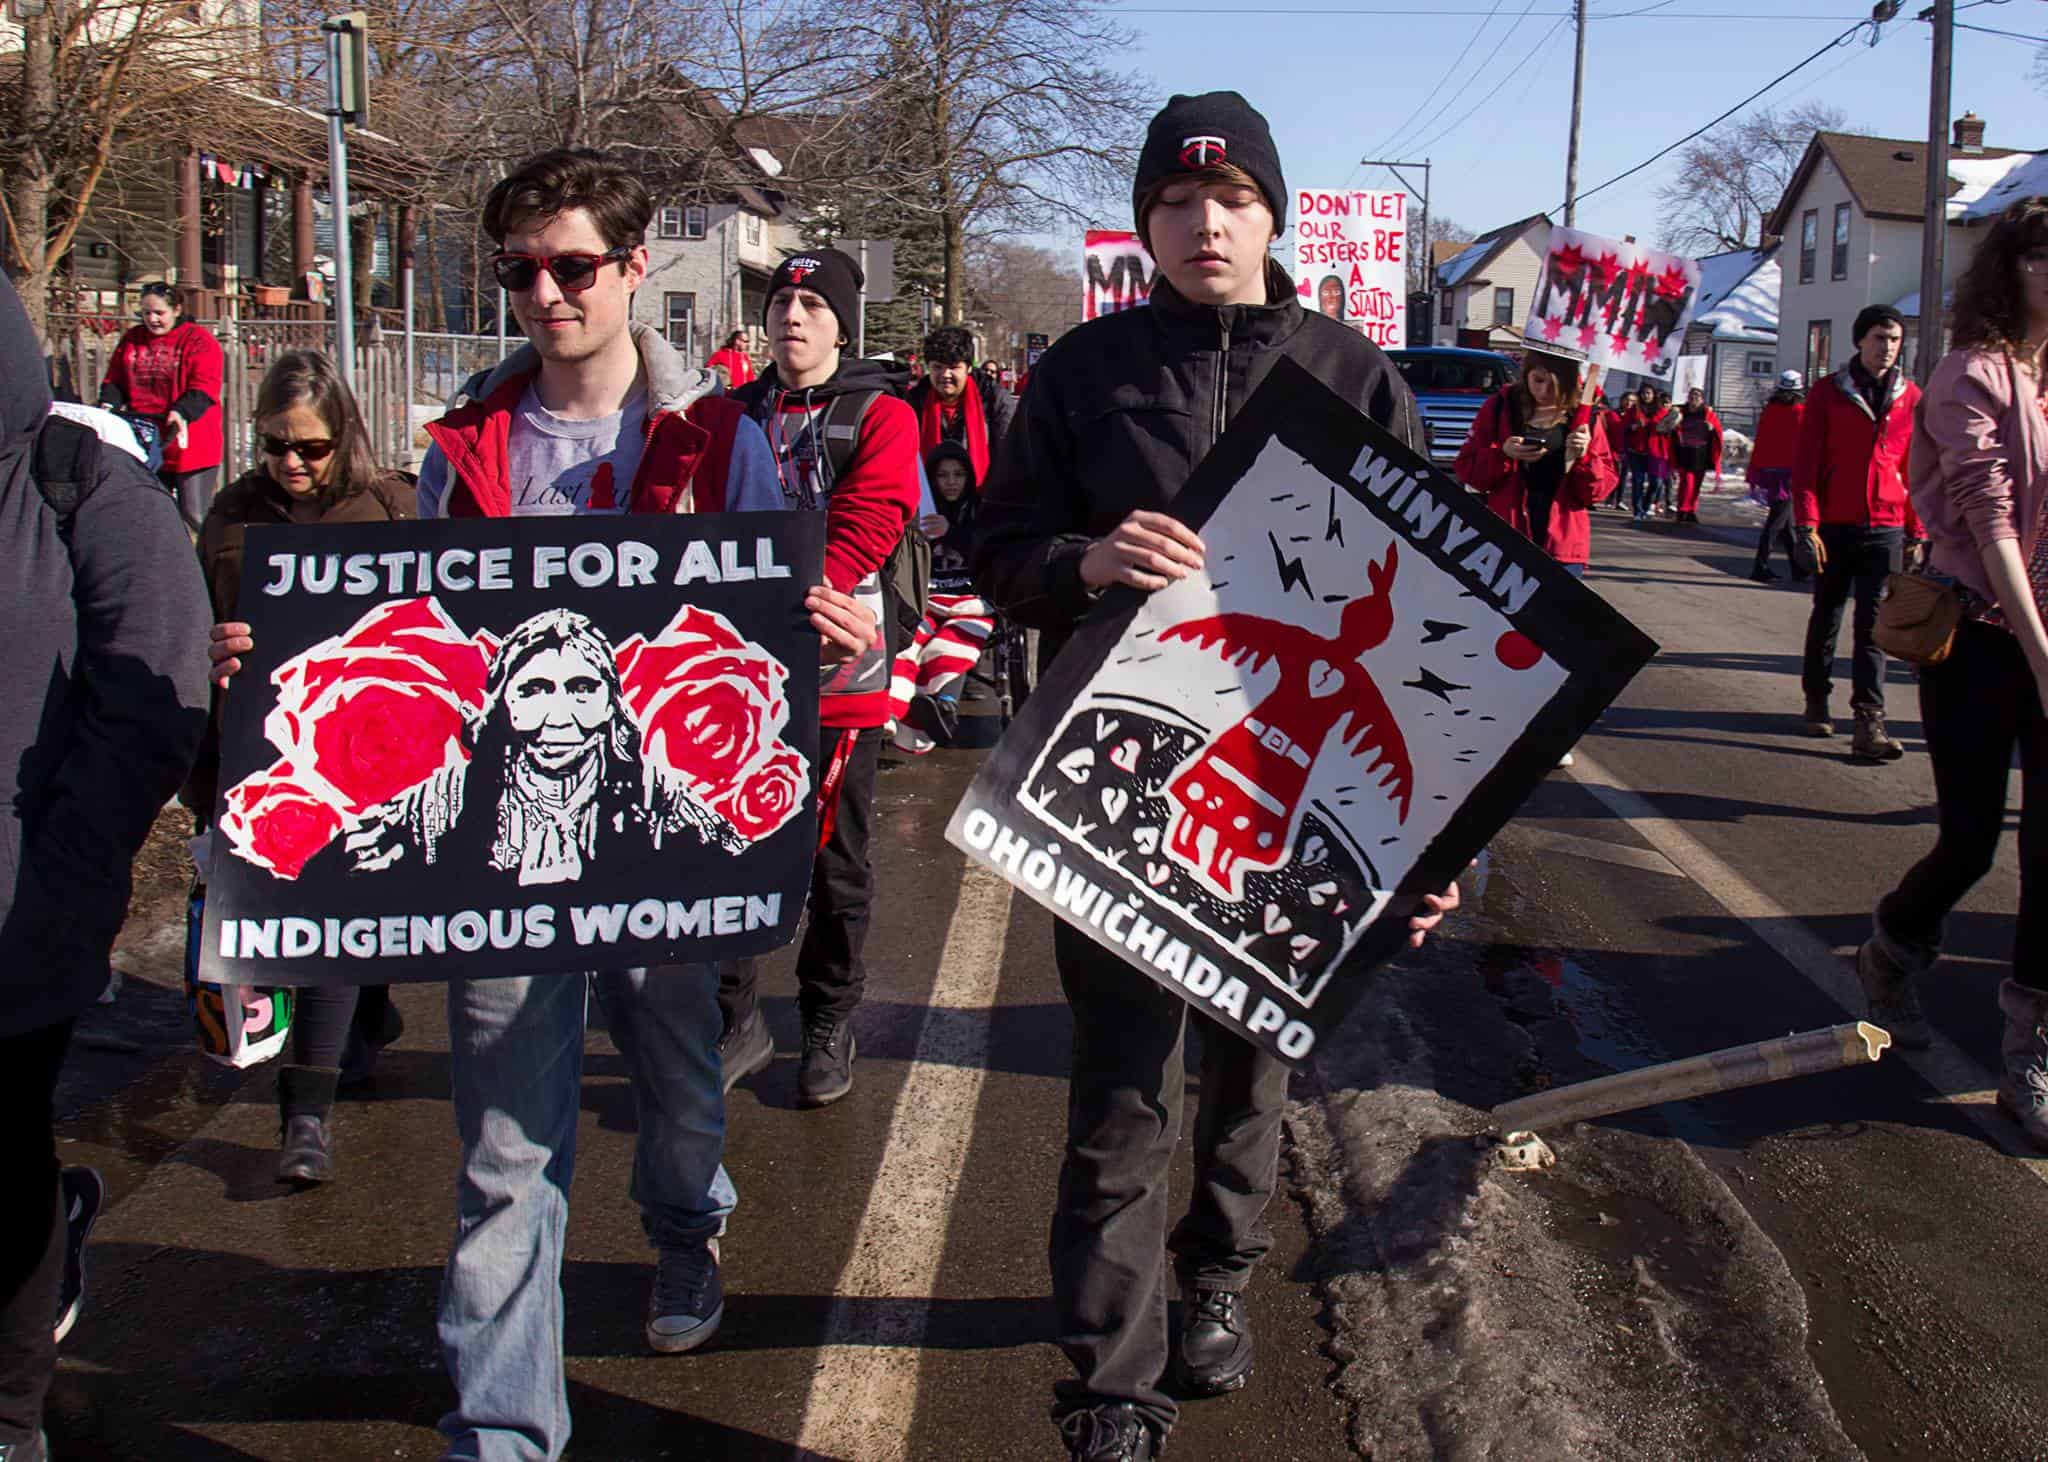 Men holding signs calling for justice for all indigenous women